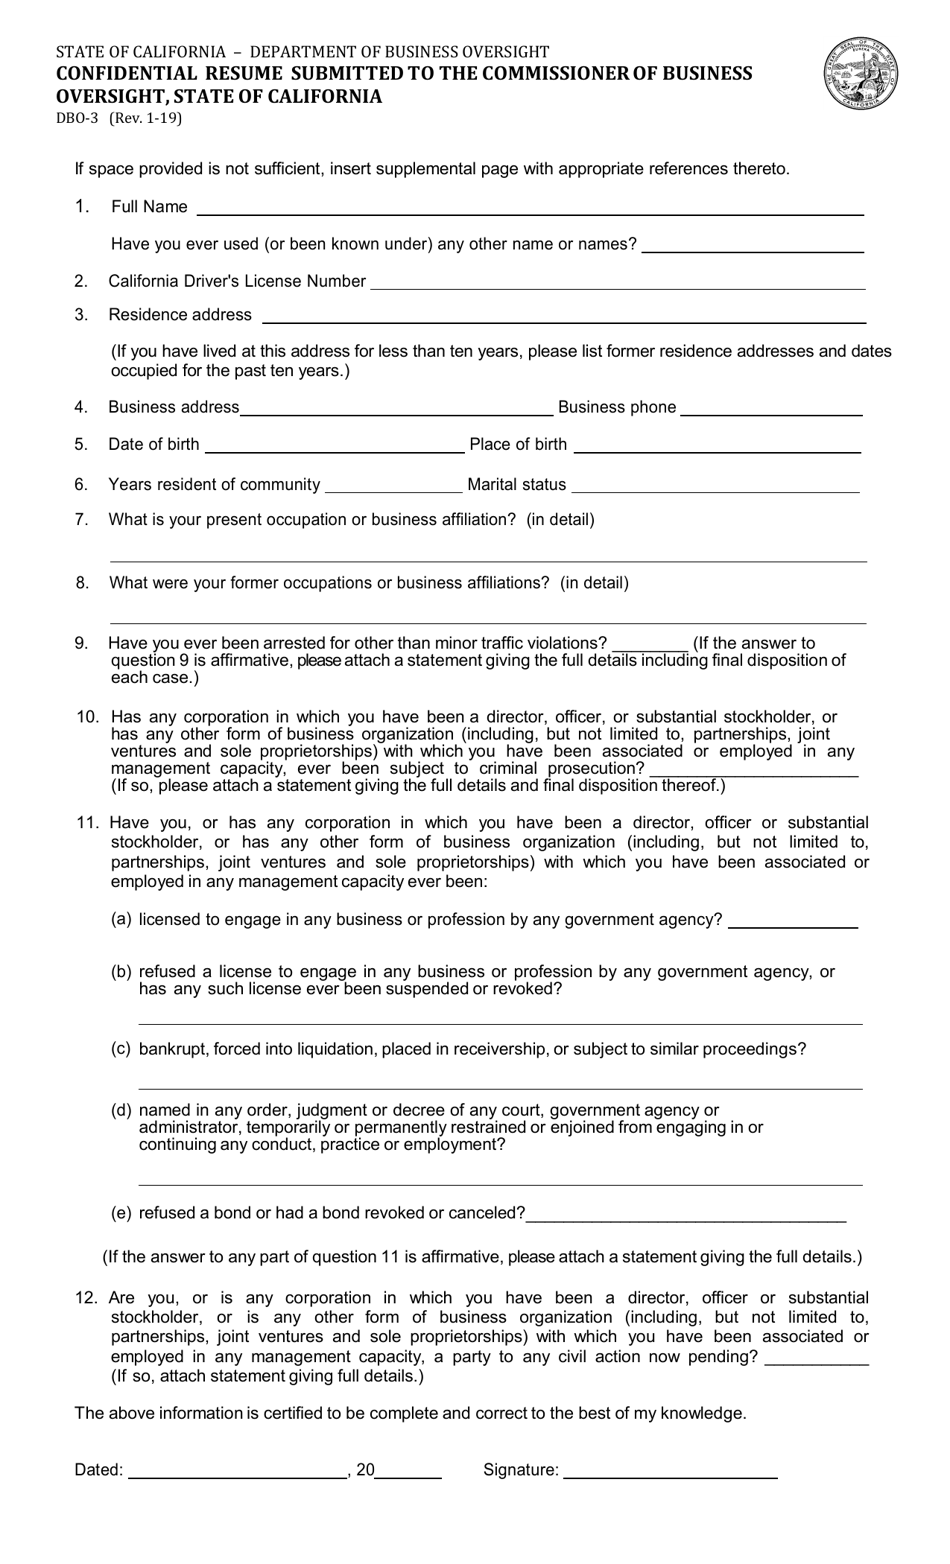 Form DBO-3 Confidential Resume Submitted to the Commissioner of Business Oversight, State of California - California, Page 1